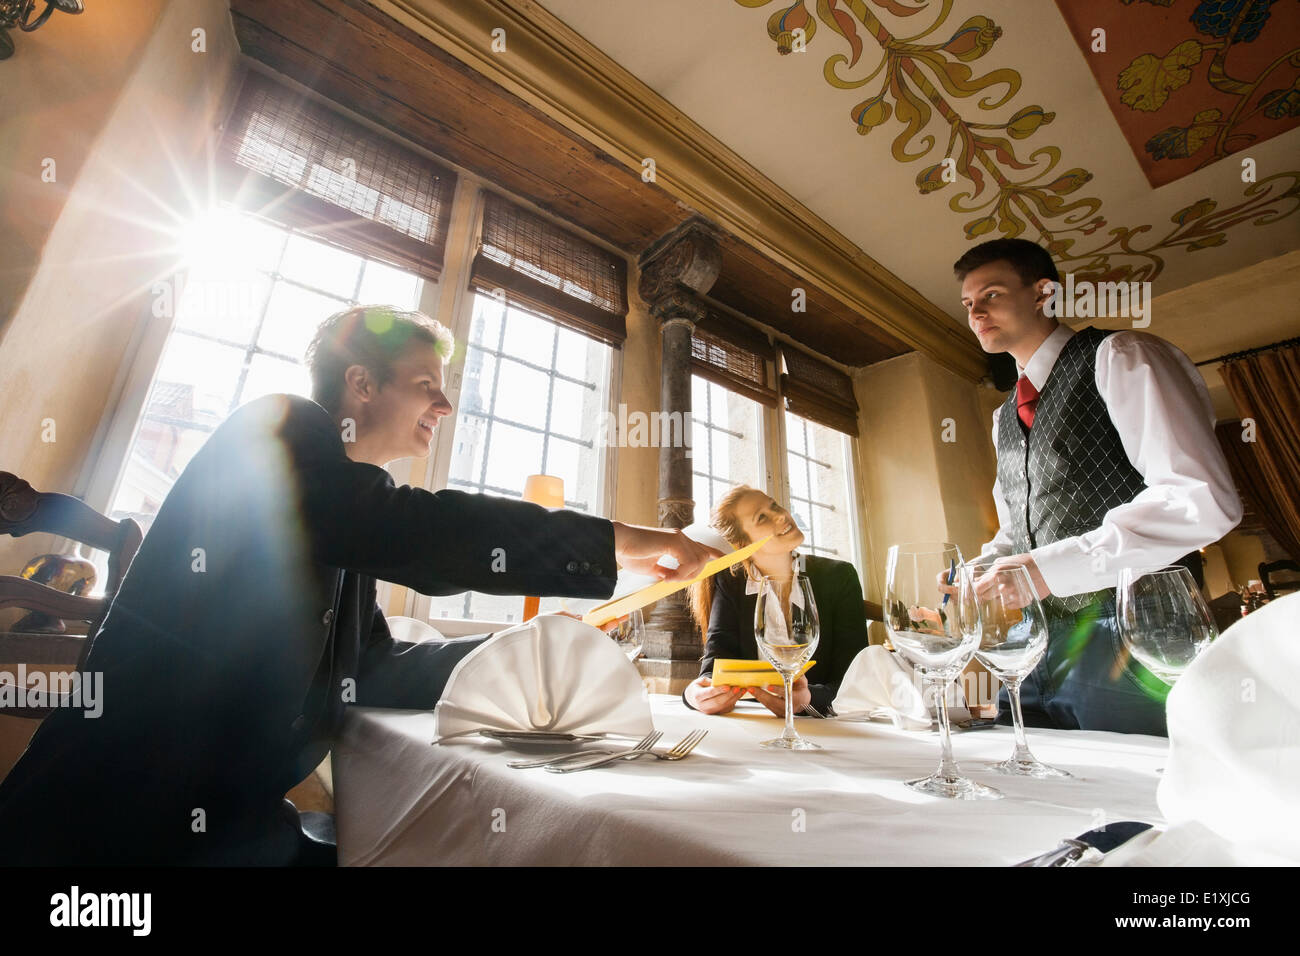 Smiling business couple ordering food at restaurant table Stock Photo